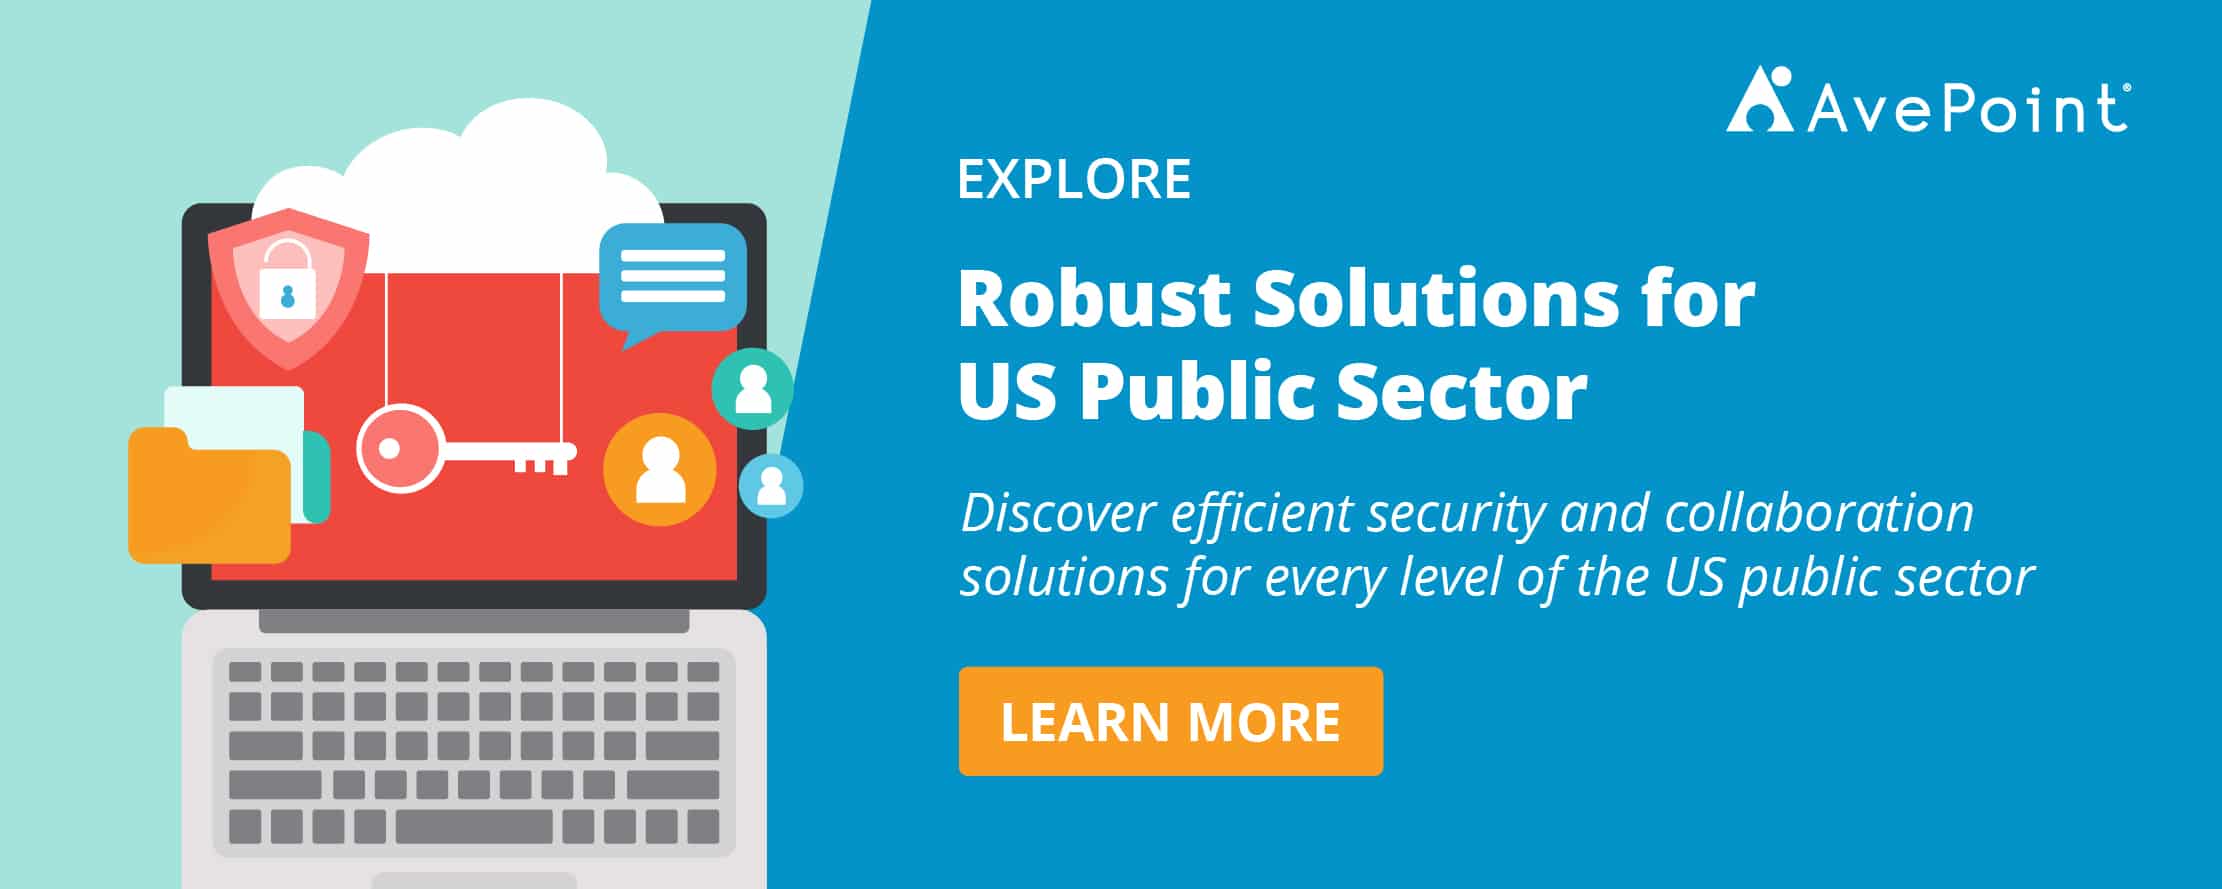 AvePoint Robust Solutions for US Public Sector_800x320px